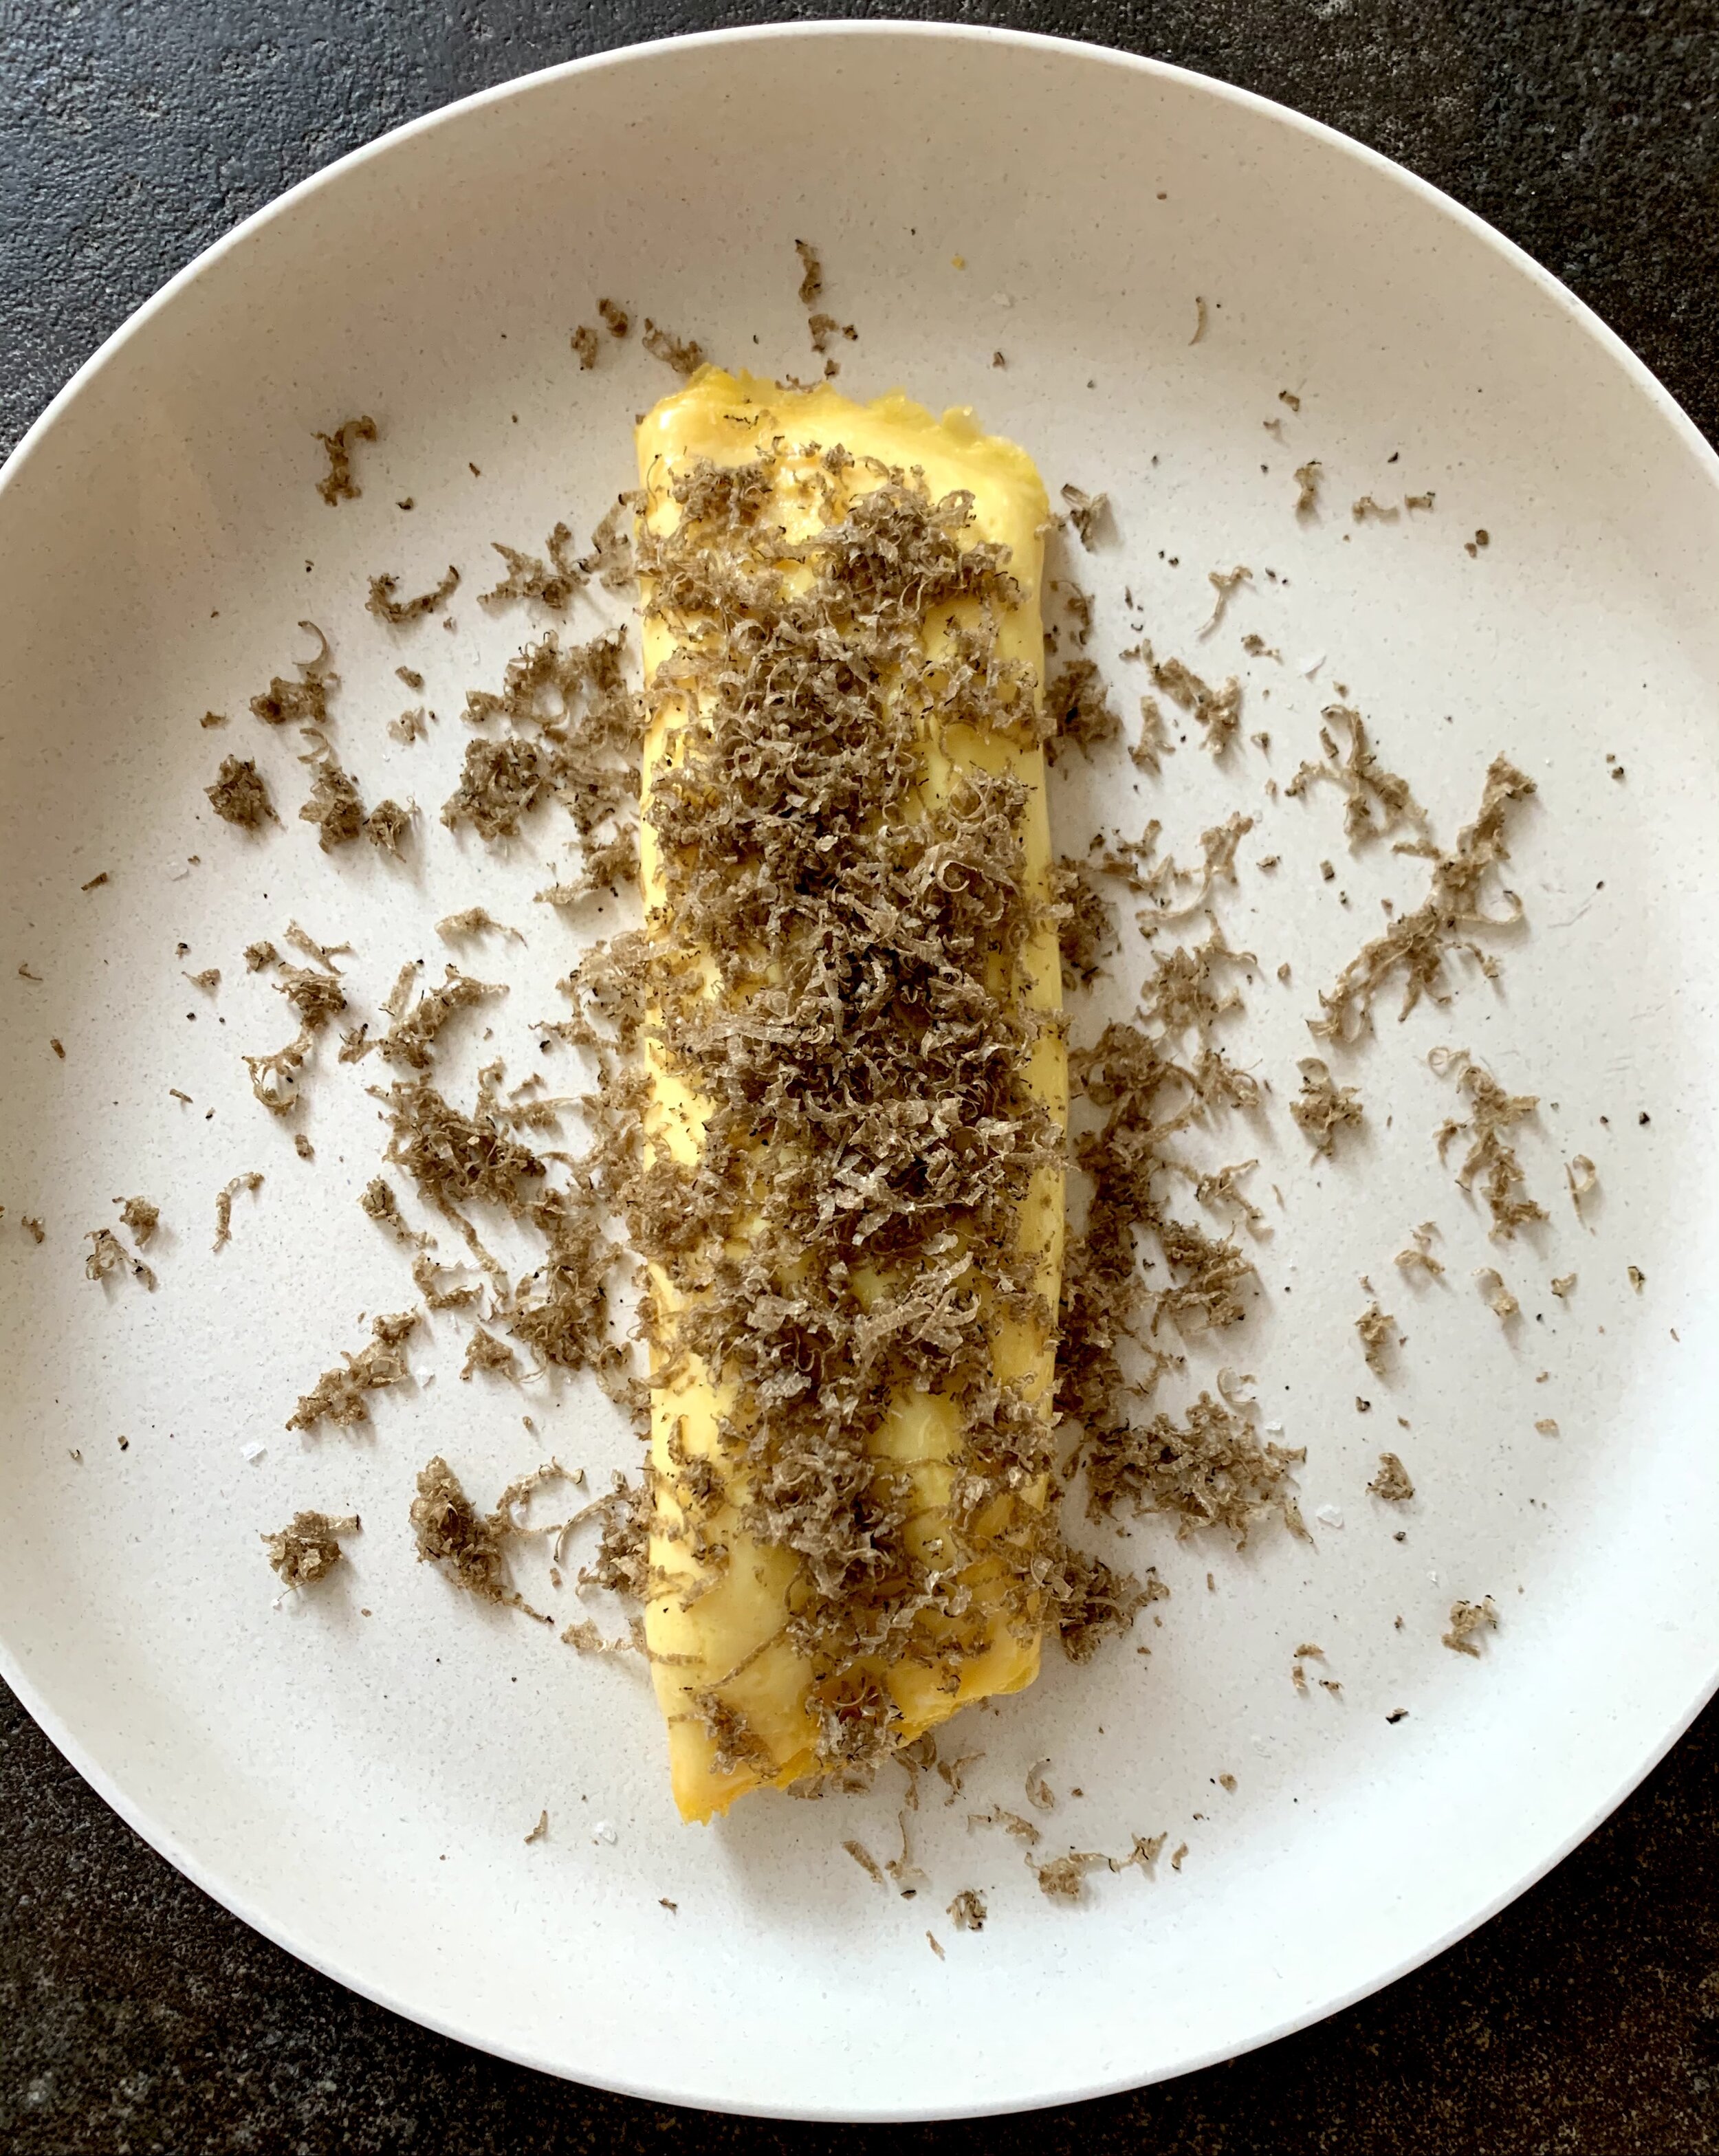 Classic French Omelette with Black Truffle